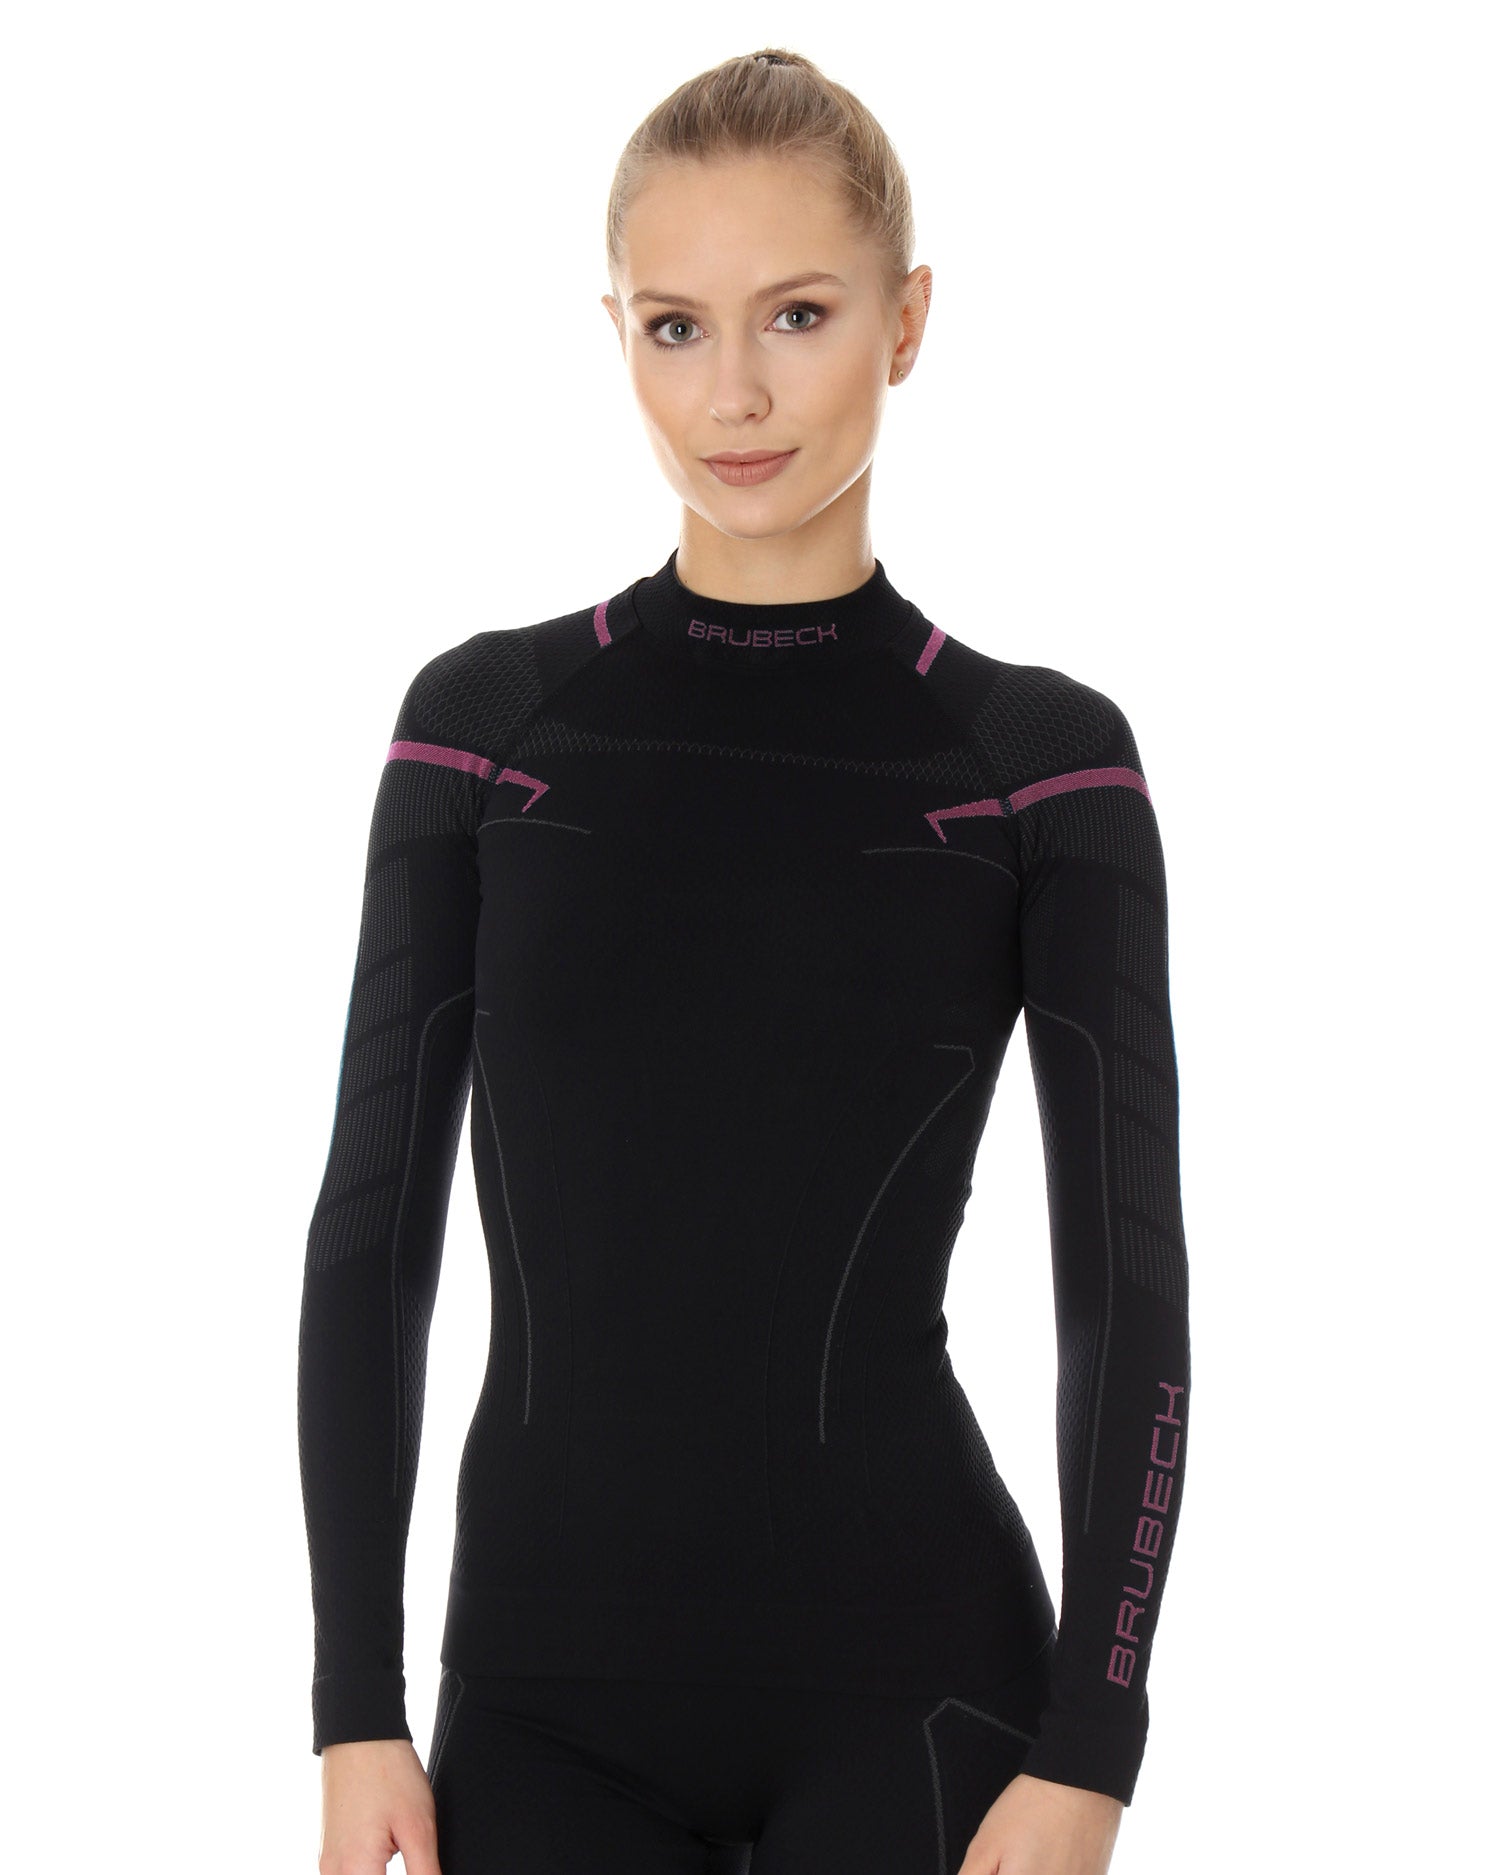 Women's Top THERMO Long Sleeve